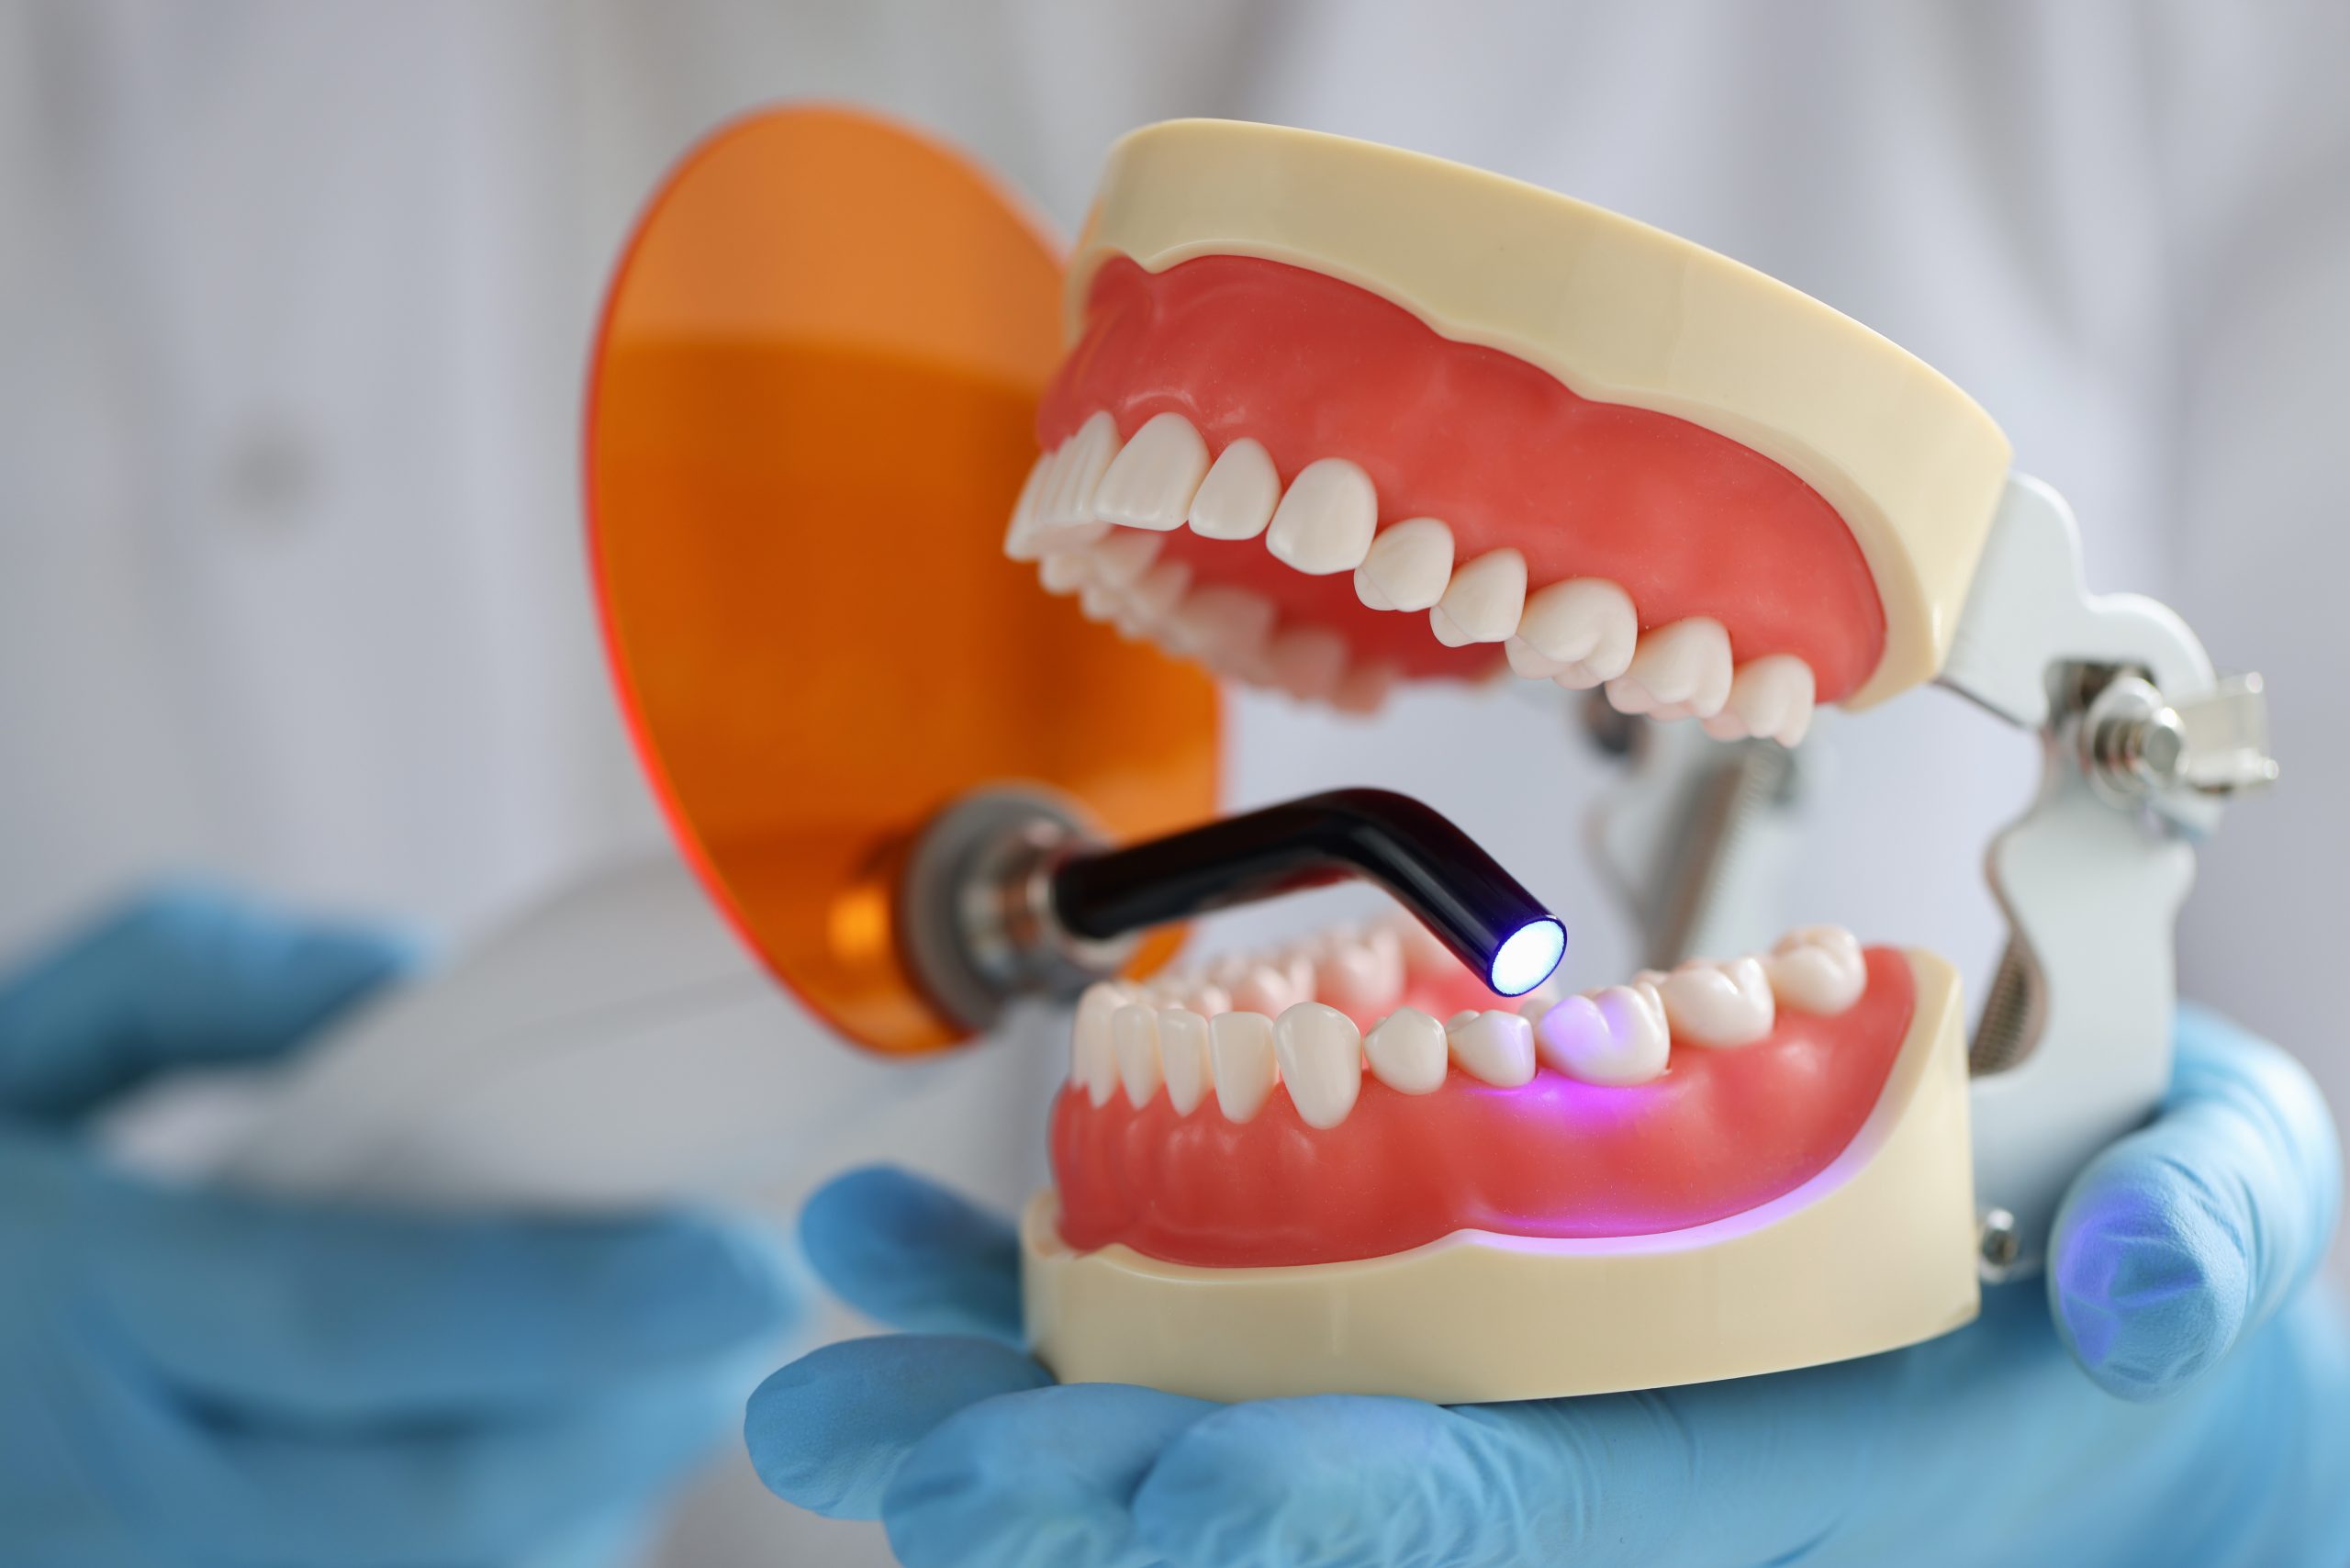 Doctor holds jaw and dental UV lamp to fill dental jaw. Dental treatment concept